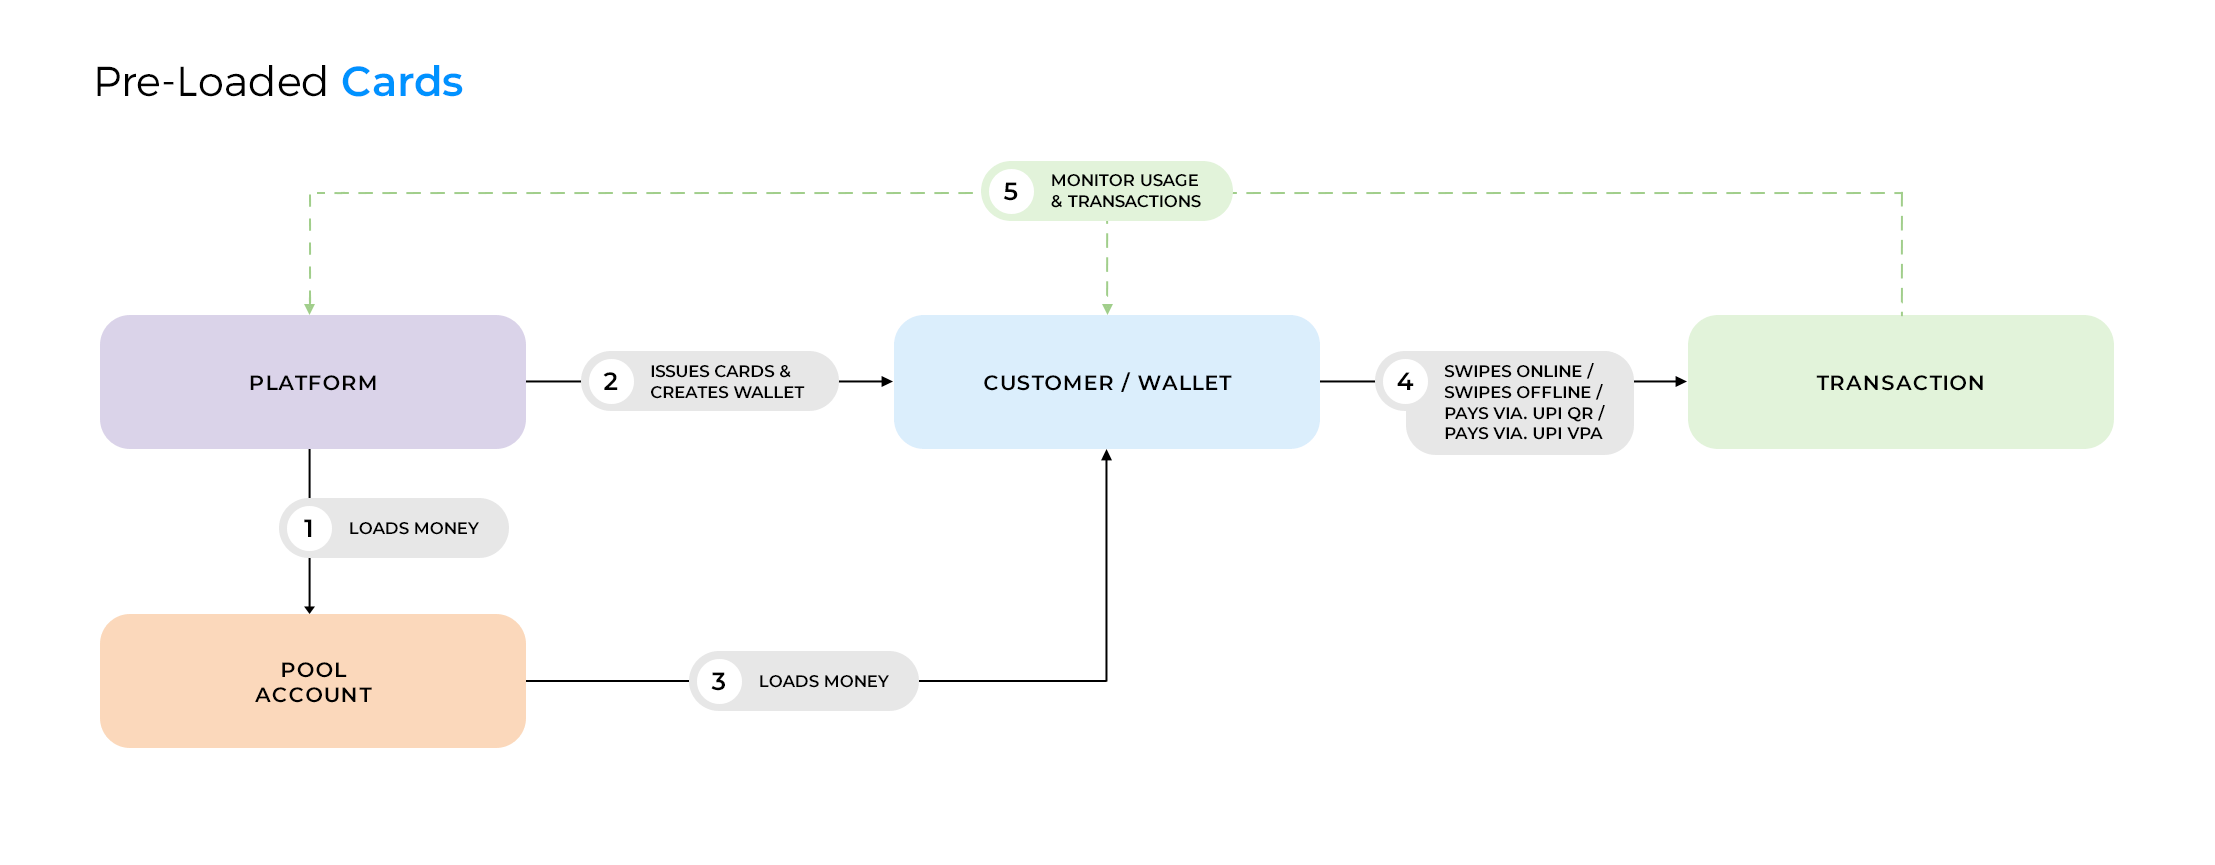 A workflow describing how pre-loaded prepaid cards function. 